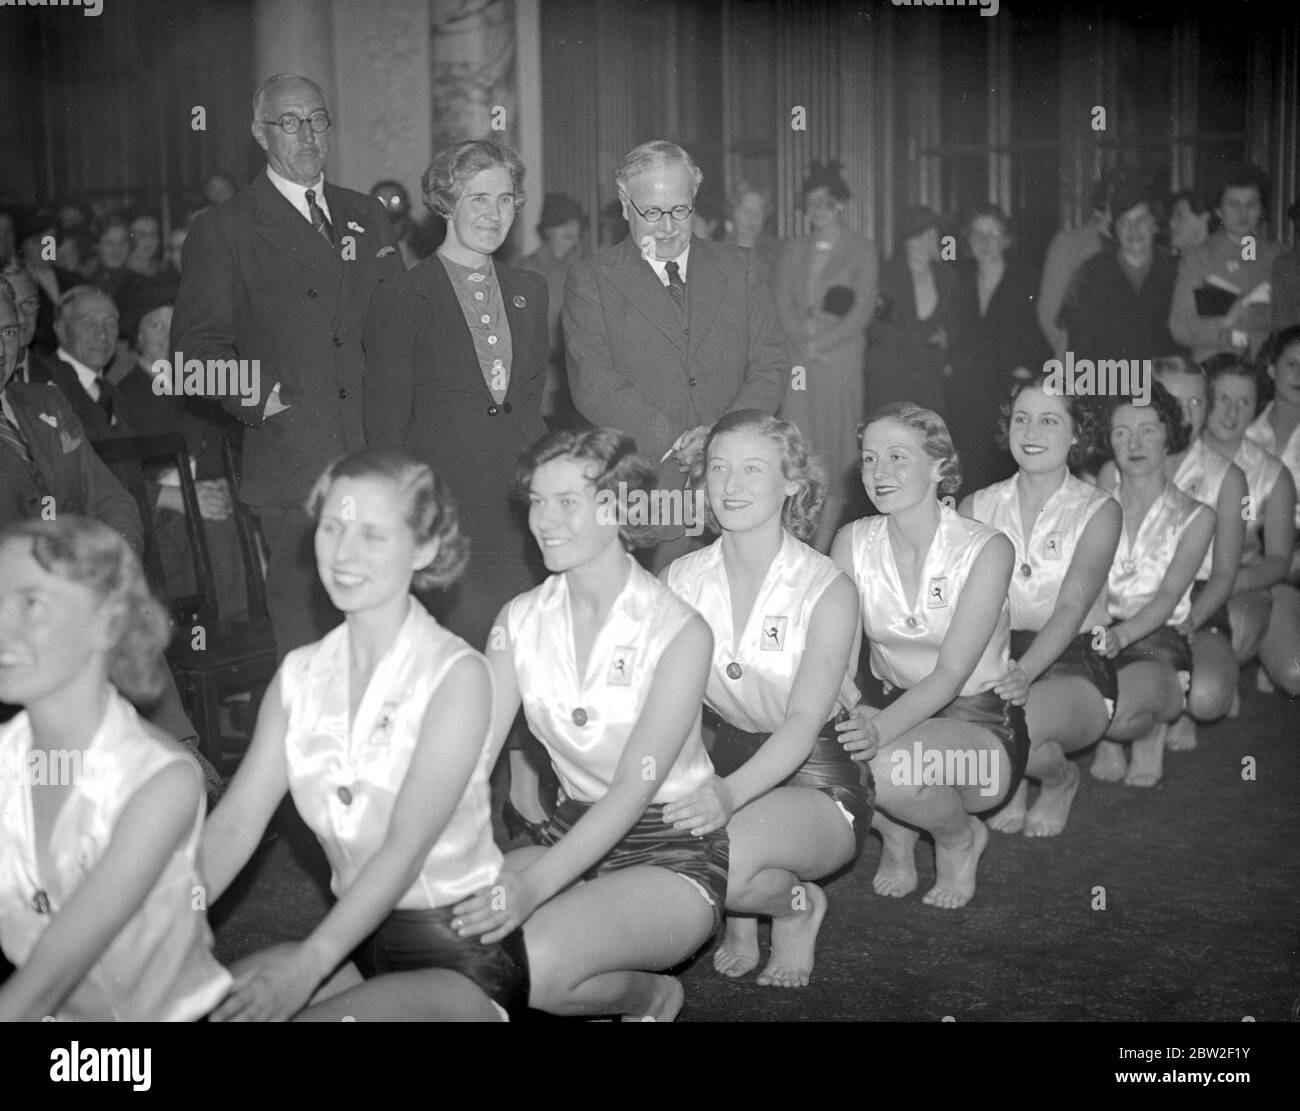 Sir Kingsley Wood (Minister of Health) , watches a demonstration by members of the women's league of health and beauty whe inaugurating a new branch at the Ministry of Health. 12 October 1937 Stock Photo